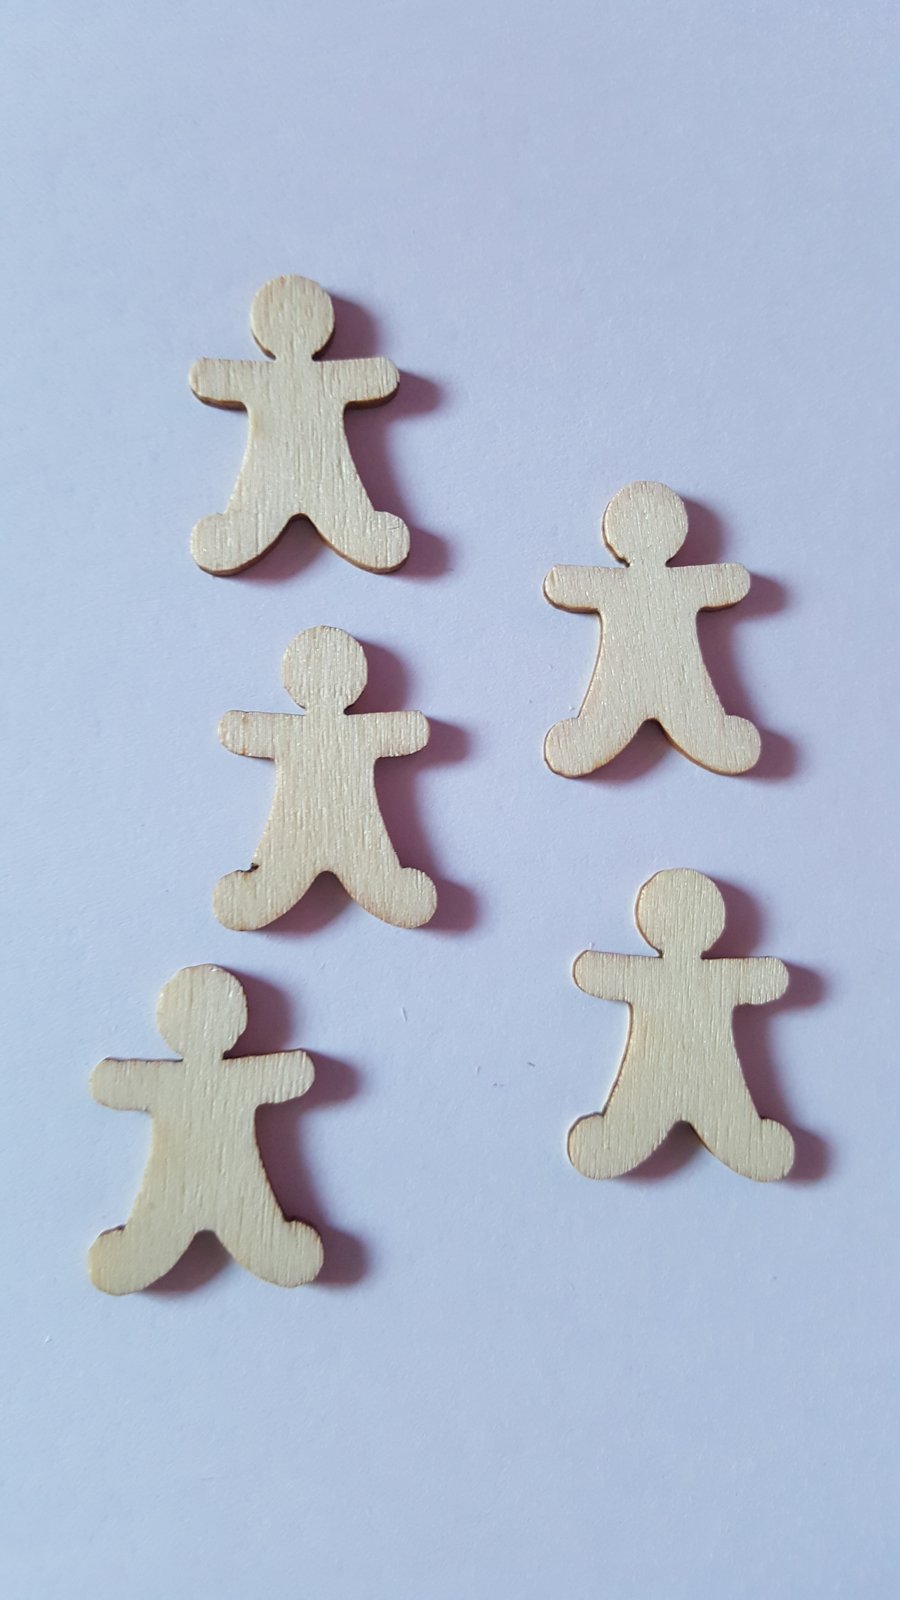 15 x Mini Blank Wooden Craft Shapes - 25mm - Christmas - Gingerbread Man 